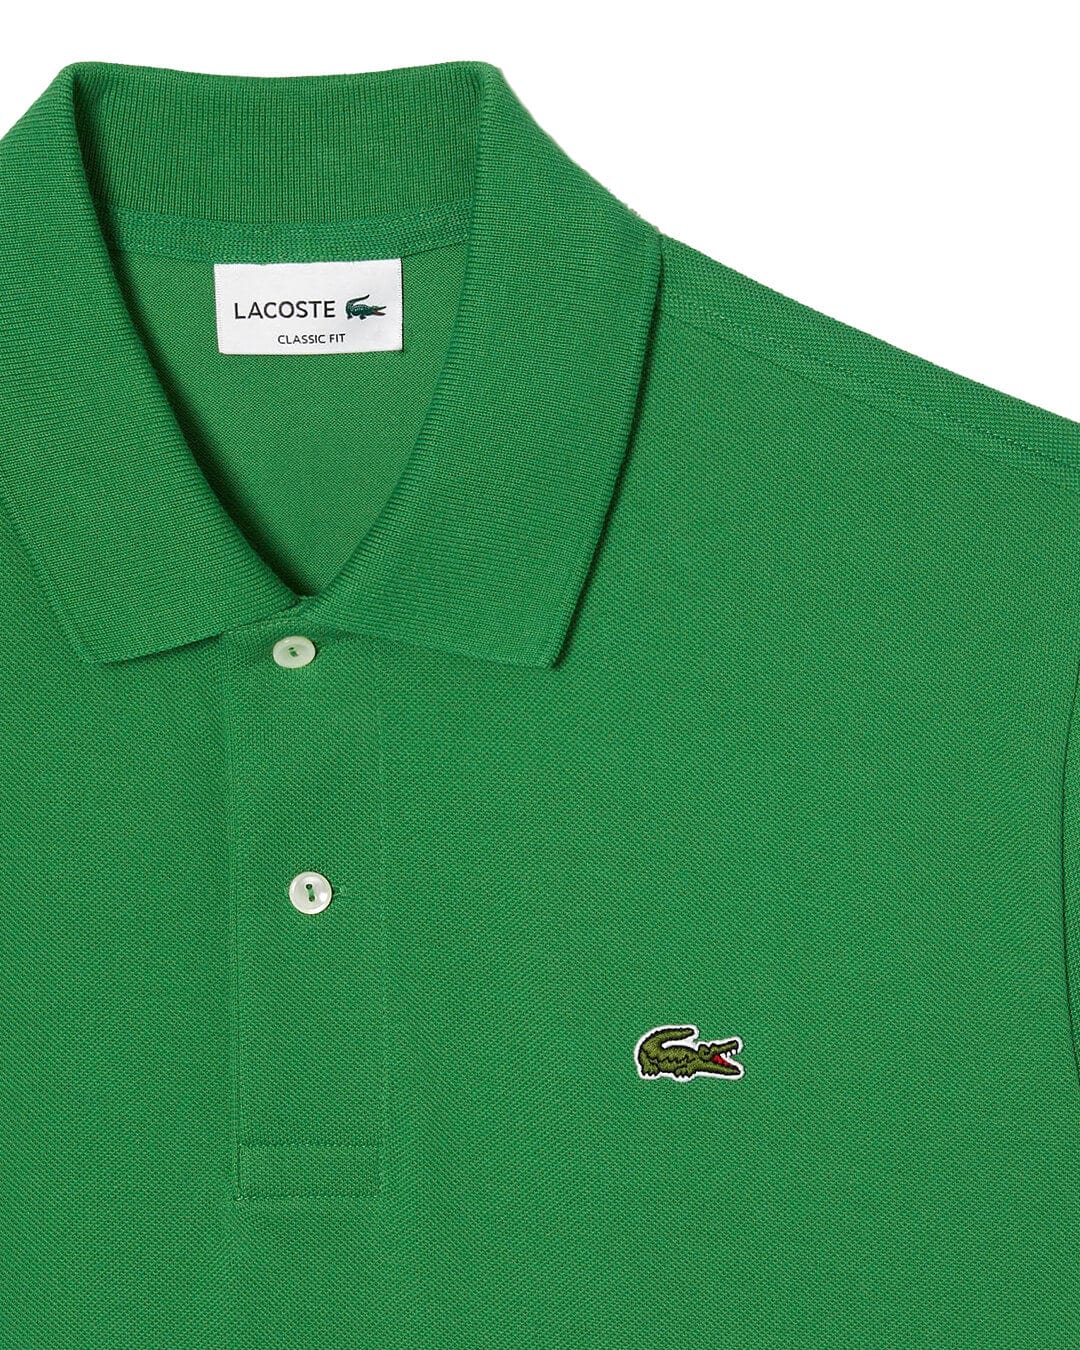 Lacoste Polo Shirts Lacoste Classic Fit L.12.12 Grey Polo Shirt